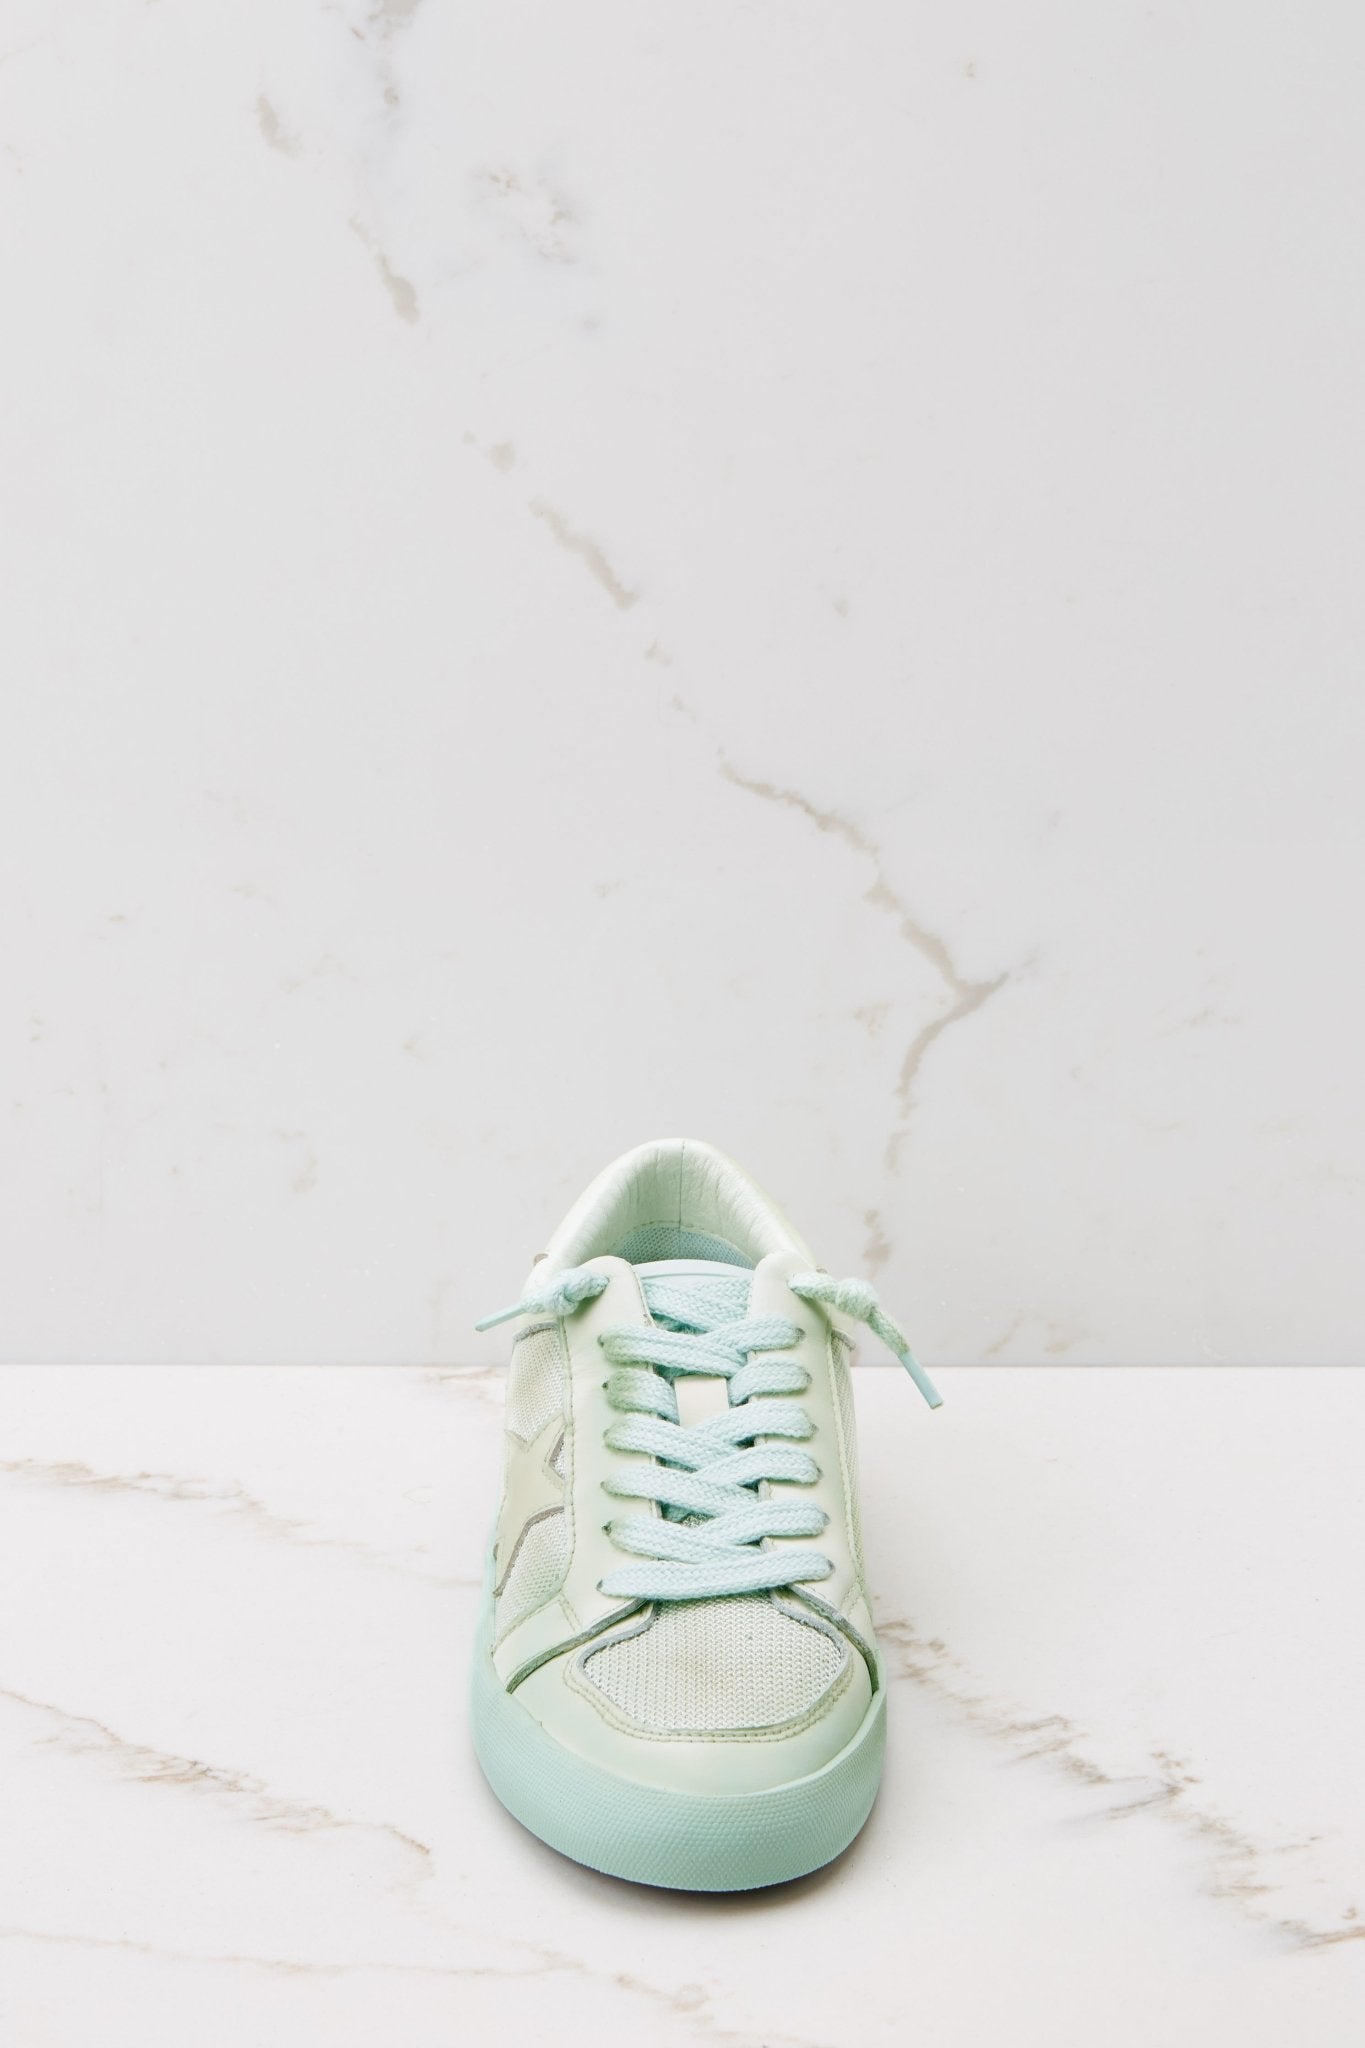 Extra Mint Sneakers - Red Dress